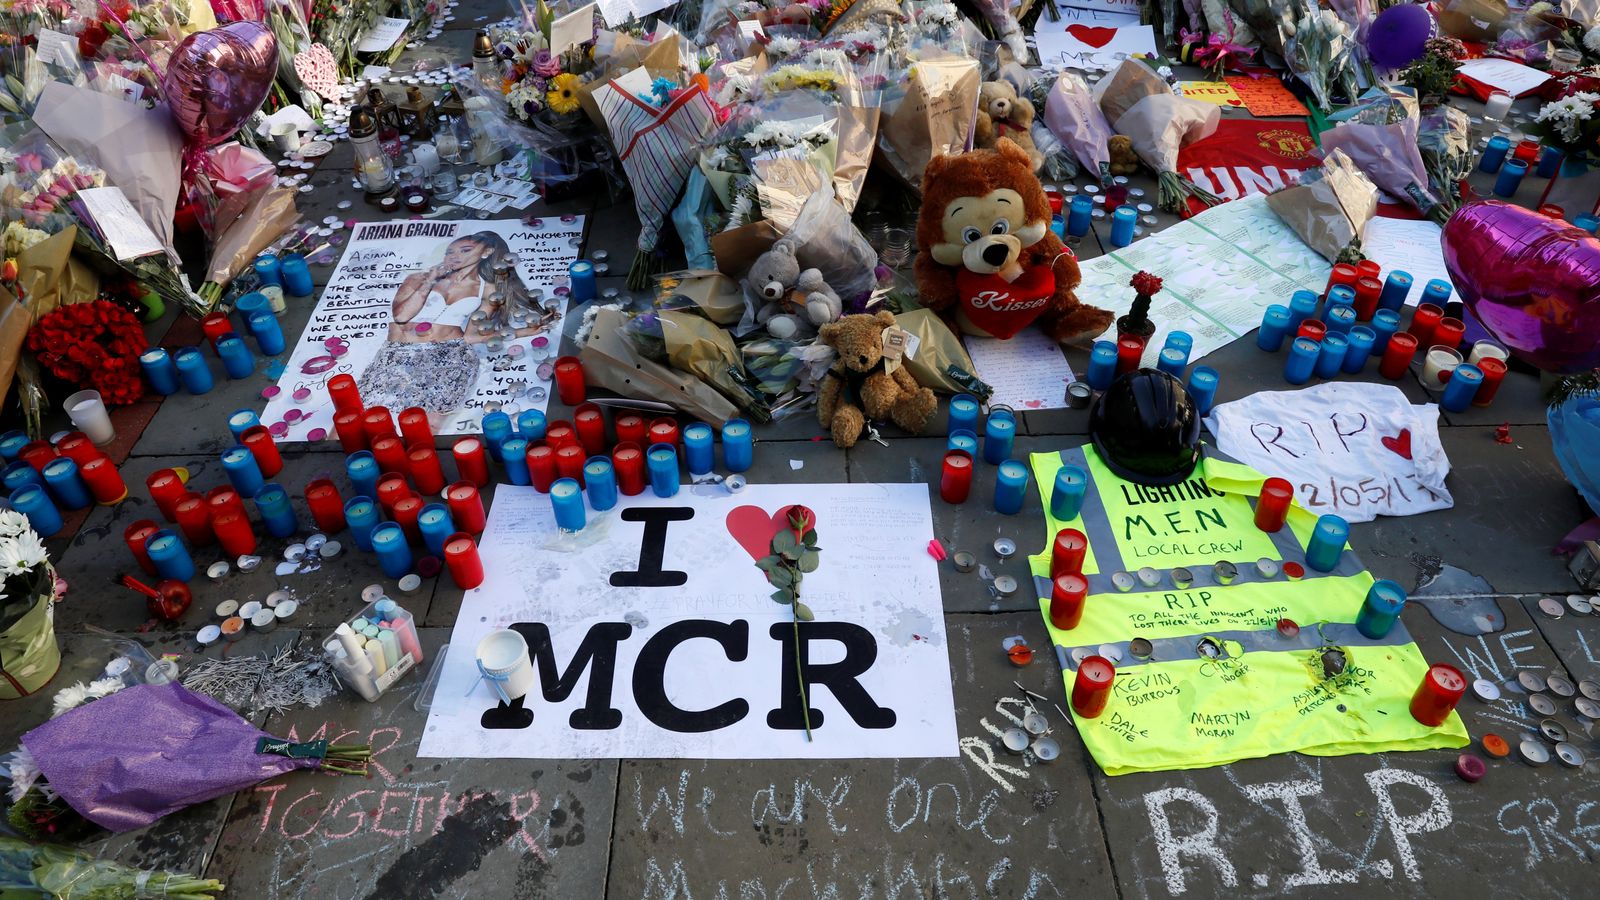 Injured survivors from Manchester Arena bombing suing MI5